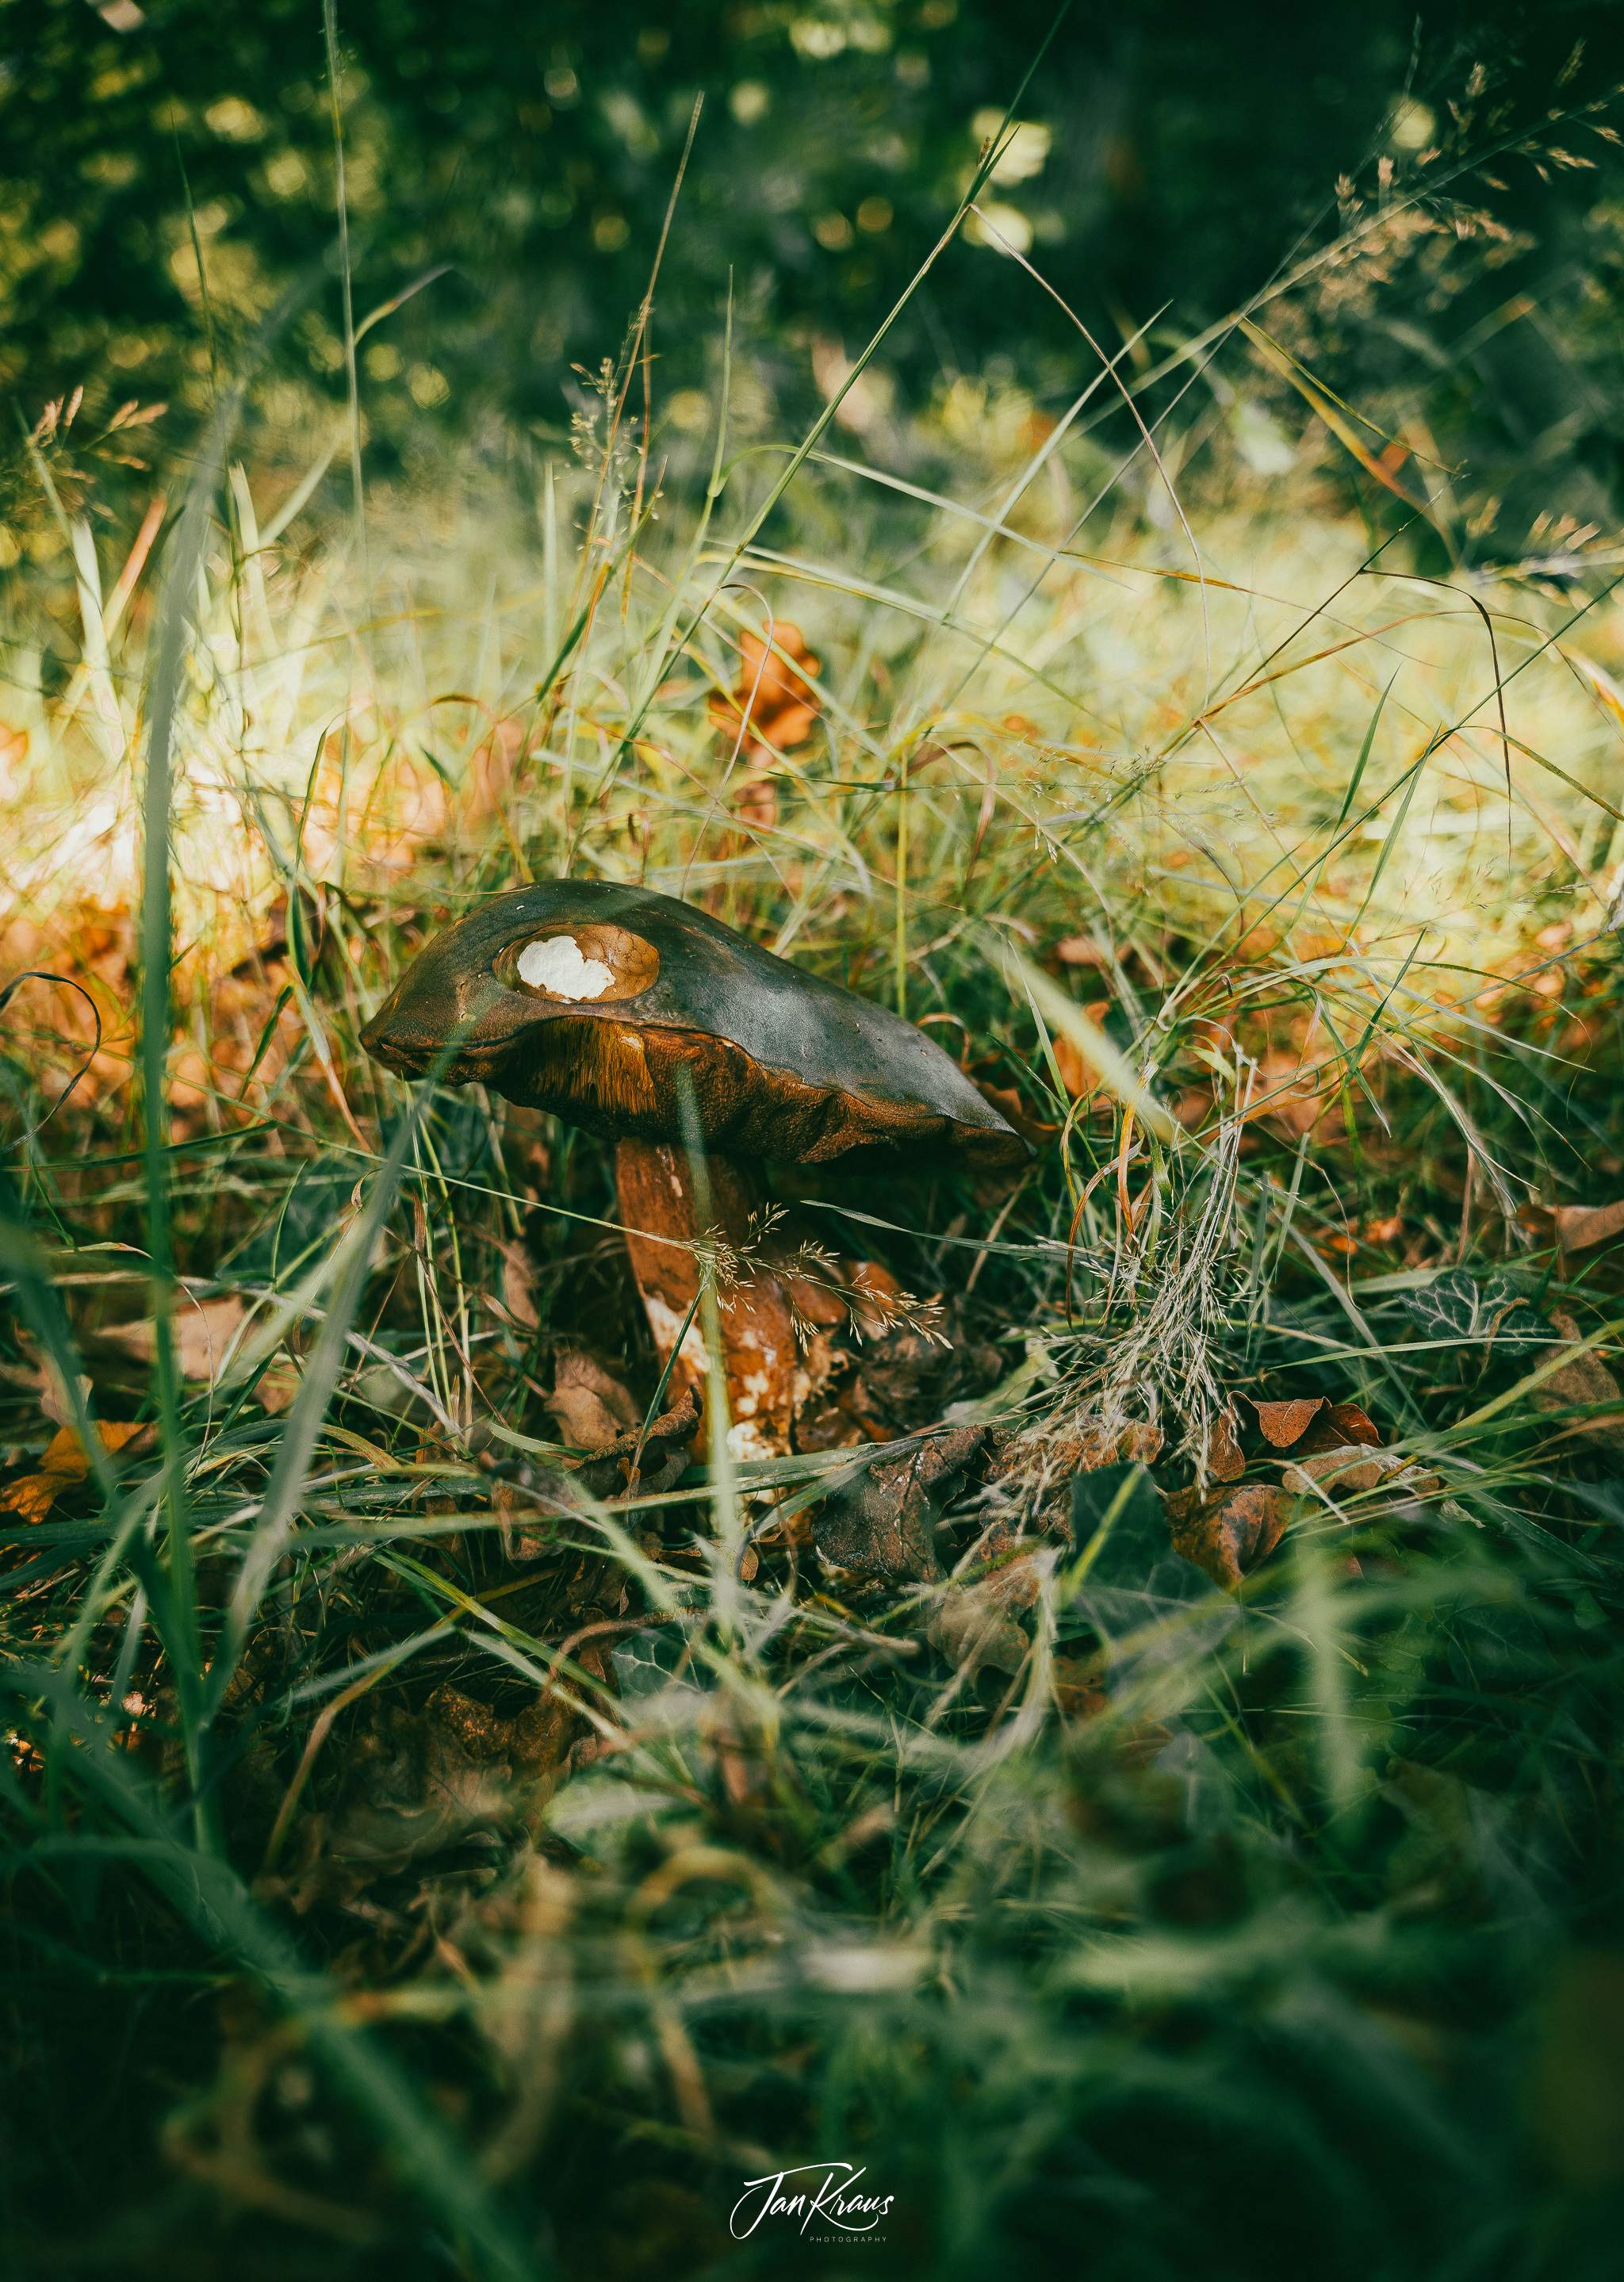 A mushroom tucked in the grass, spotted somewhere along the path, England, UK